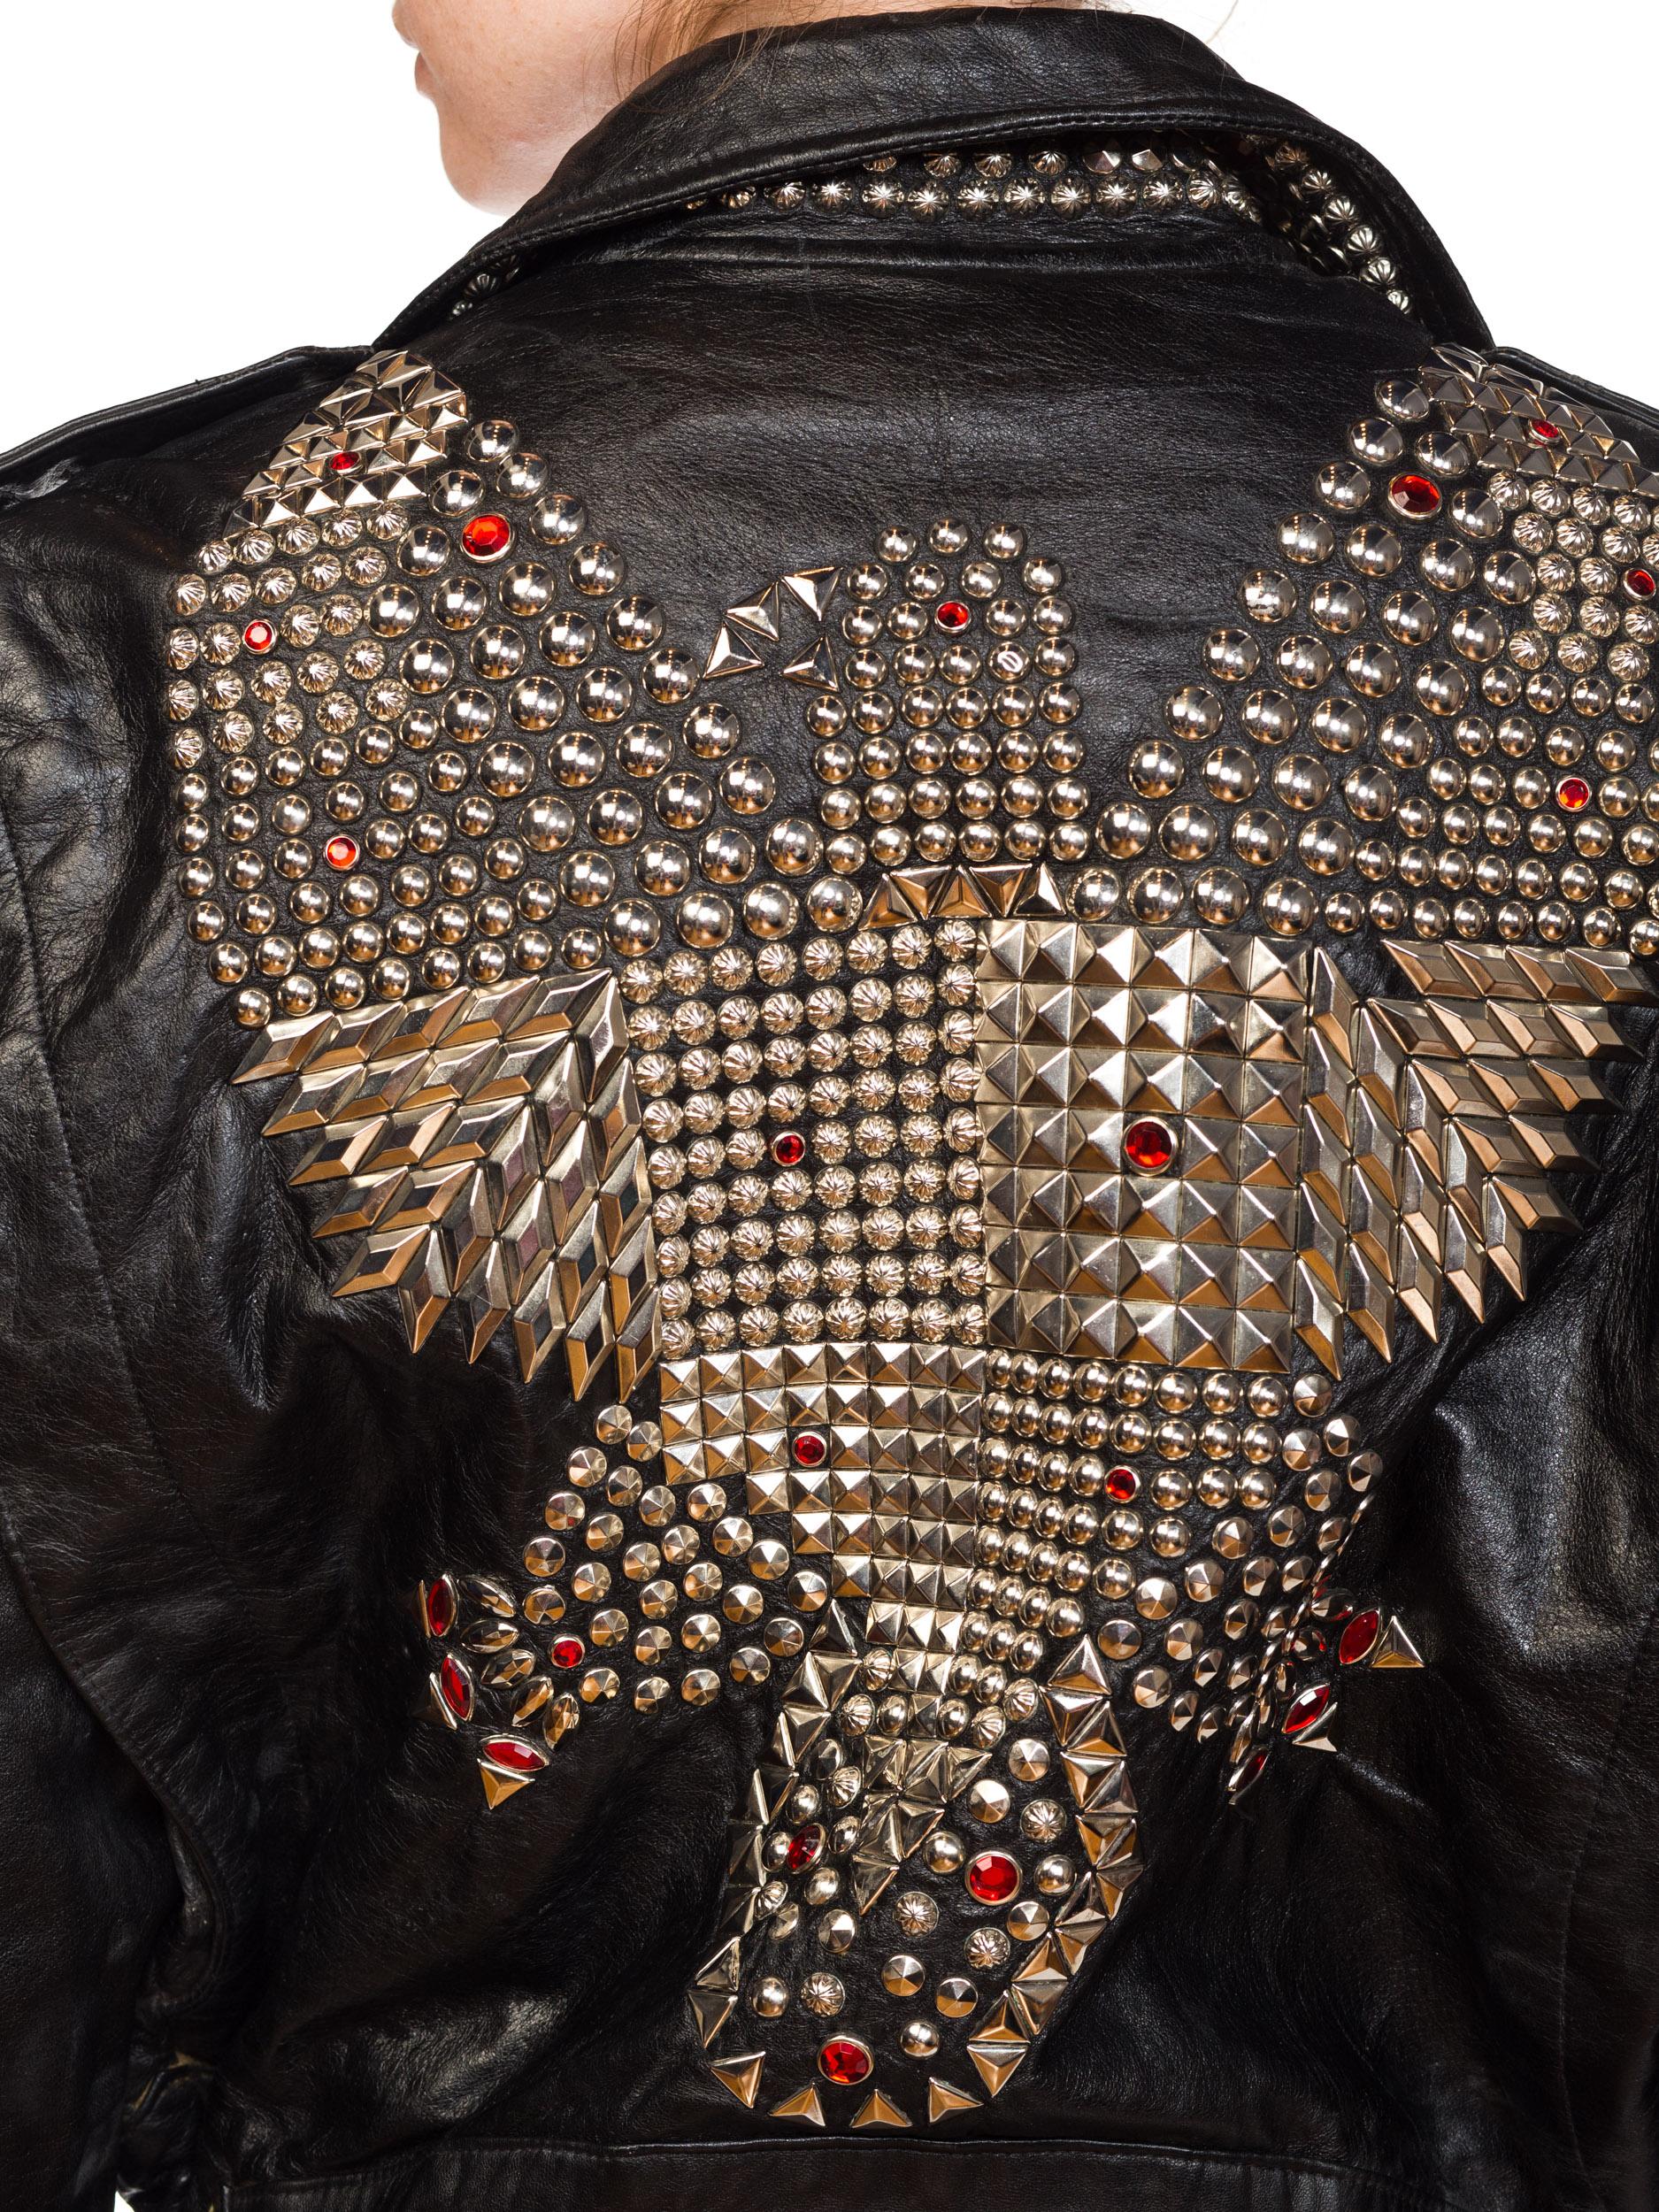 Leather Biker Jacket Covered in Studs & Crystals 10